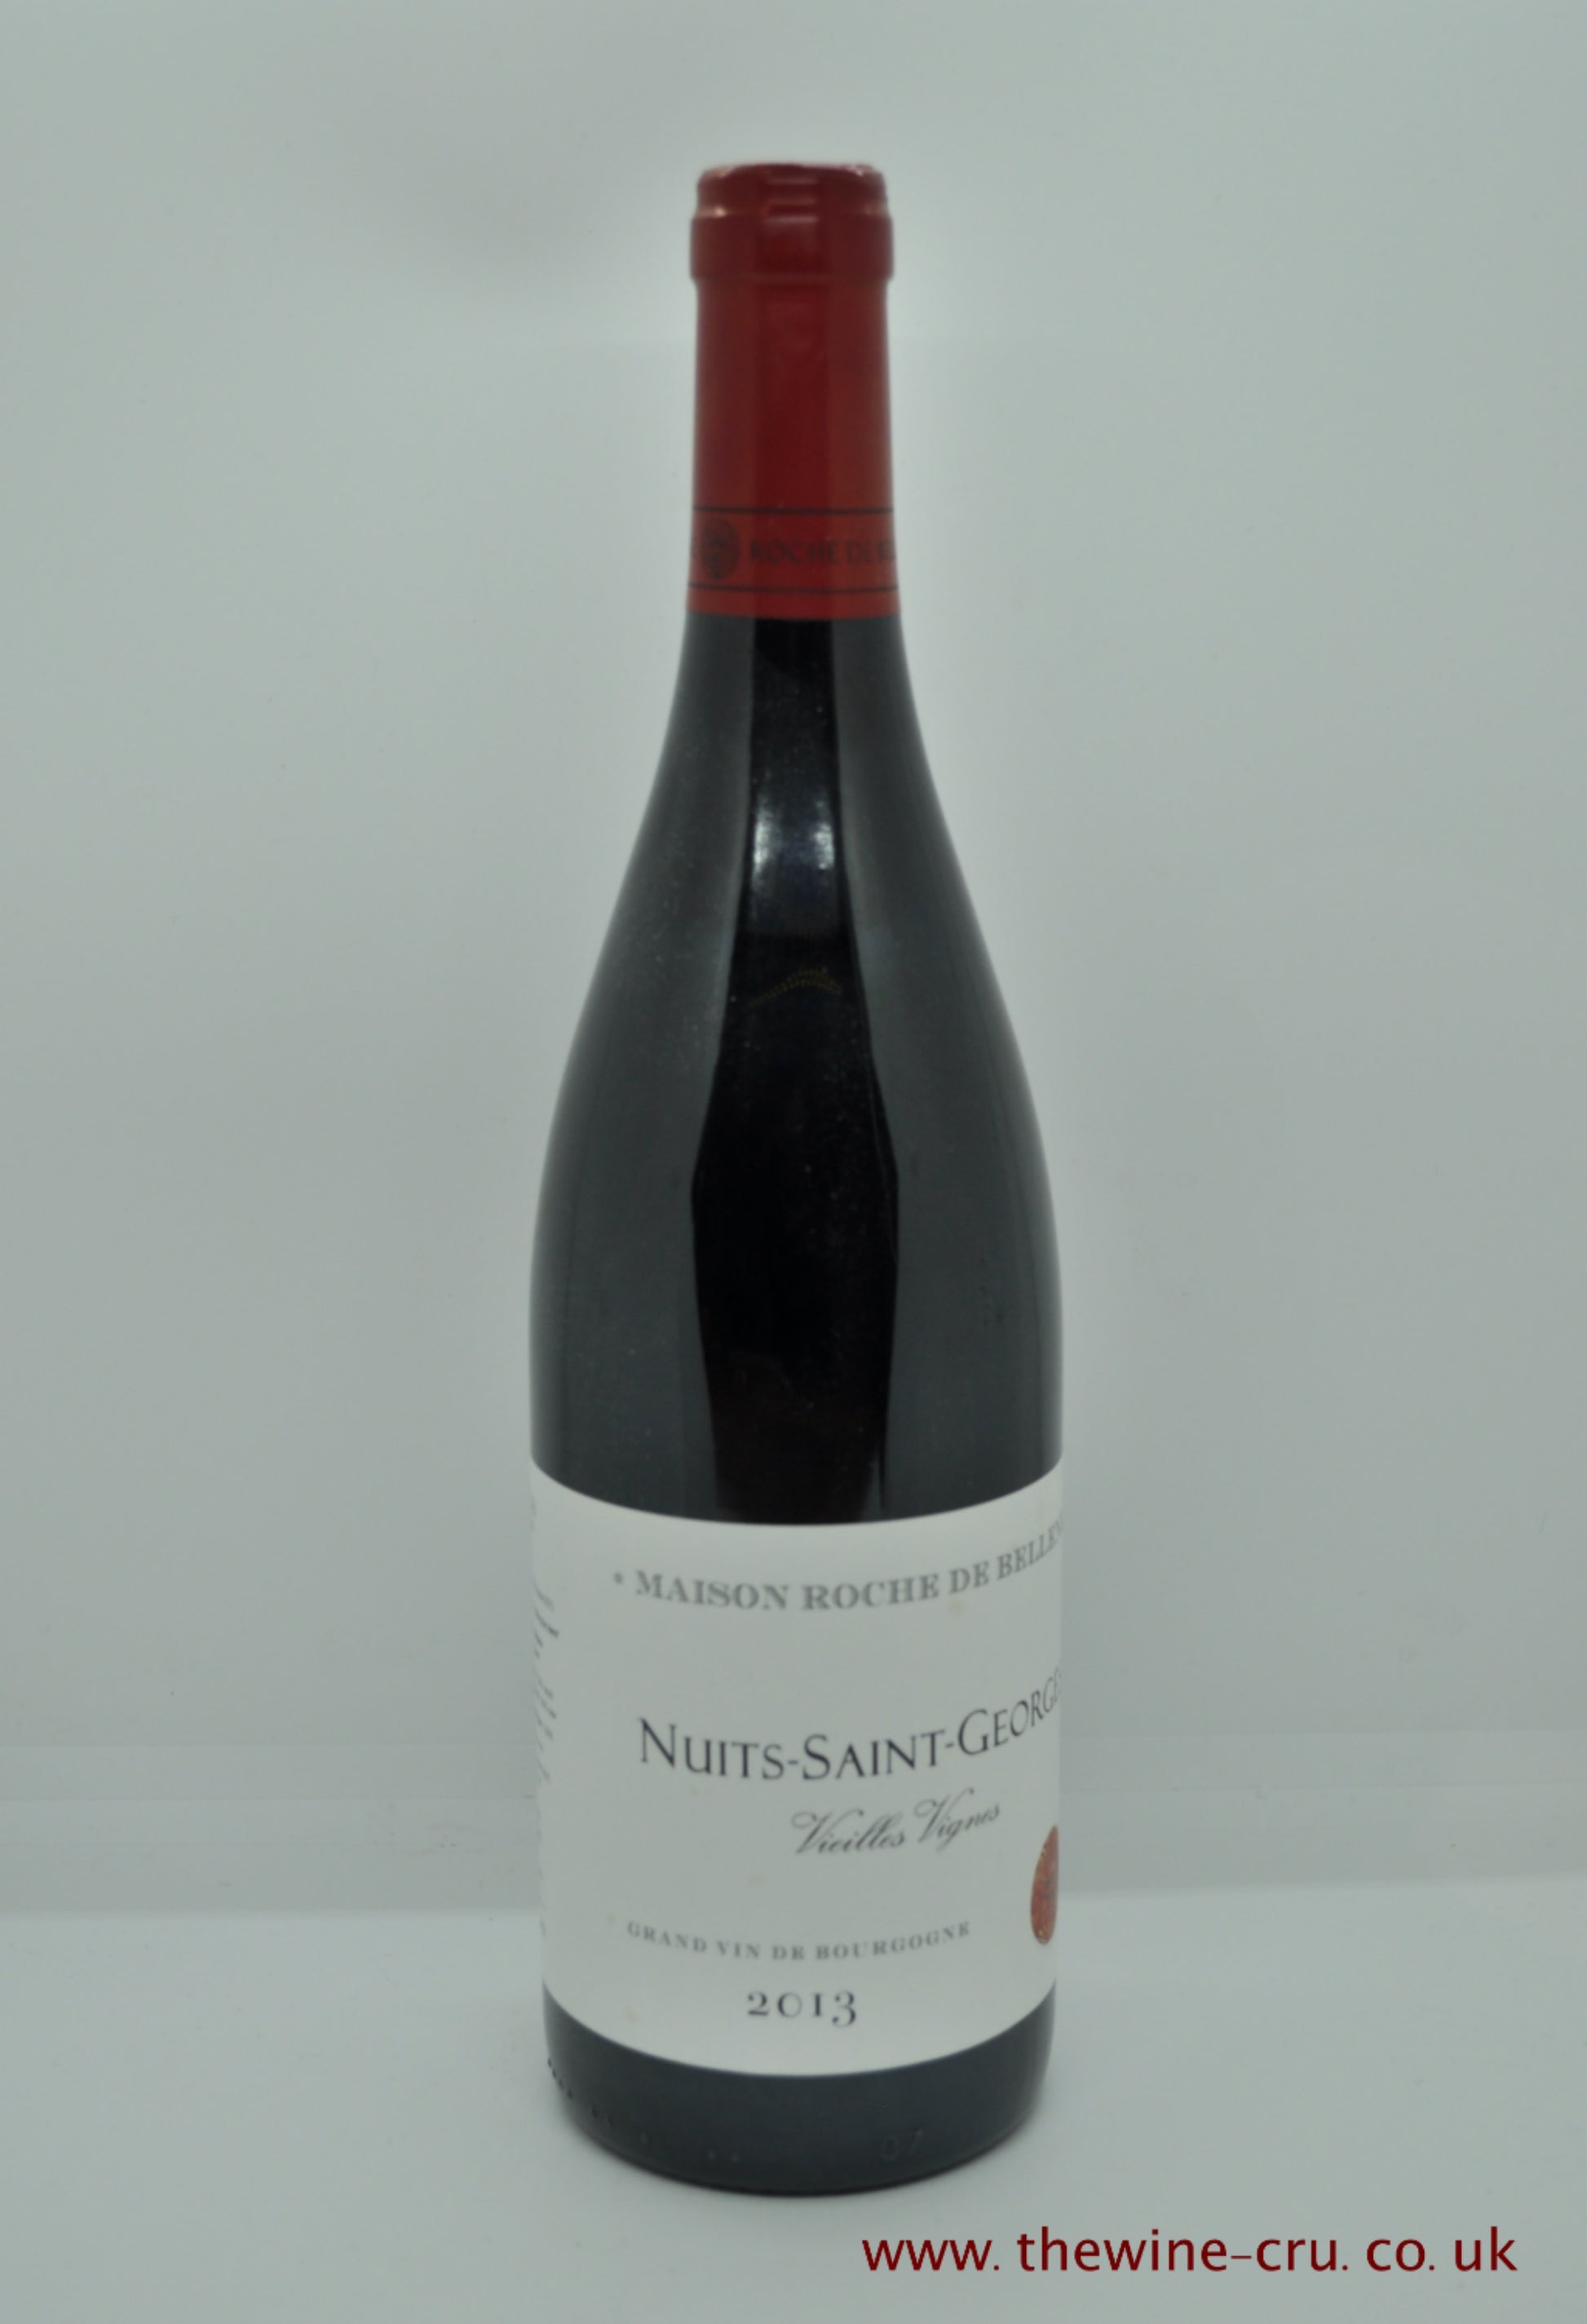 2013 vintage red wine. Nuits saint Georges Vieilles Vignes Maison Roche de Bellene 2013. france, Burgundy. Immediate delivery. Free local delivery. Gift wrapping available